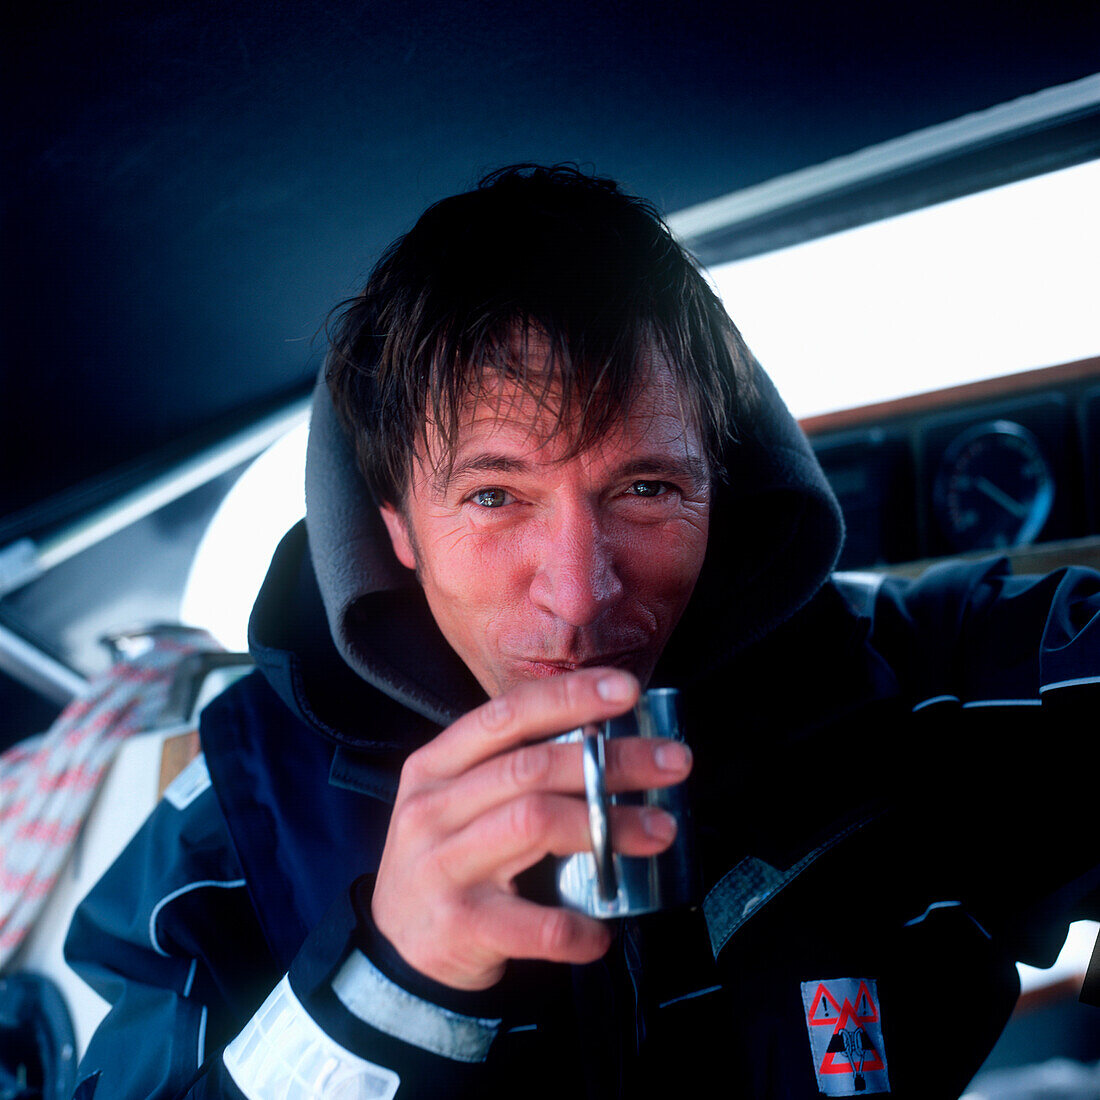 Portrait of a man on a sailboat drinking a cup of hot coffee, Bay of Kiel between Germany and Denmark